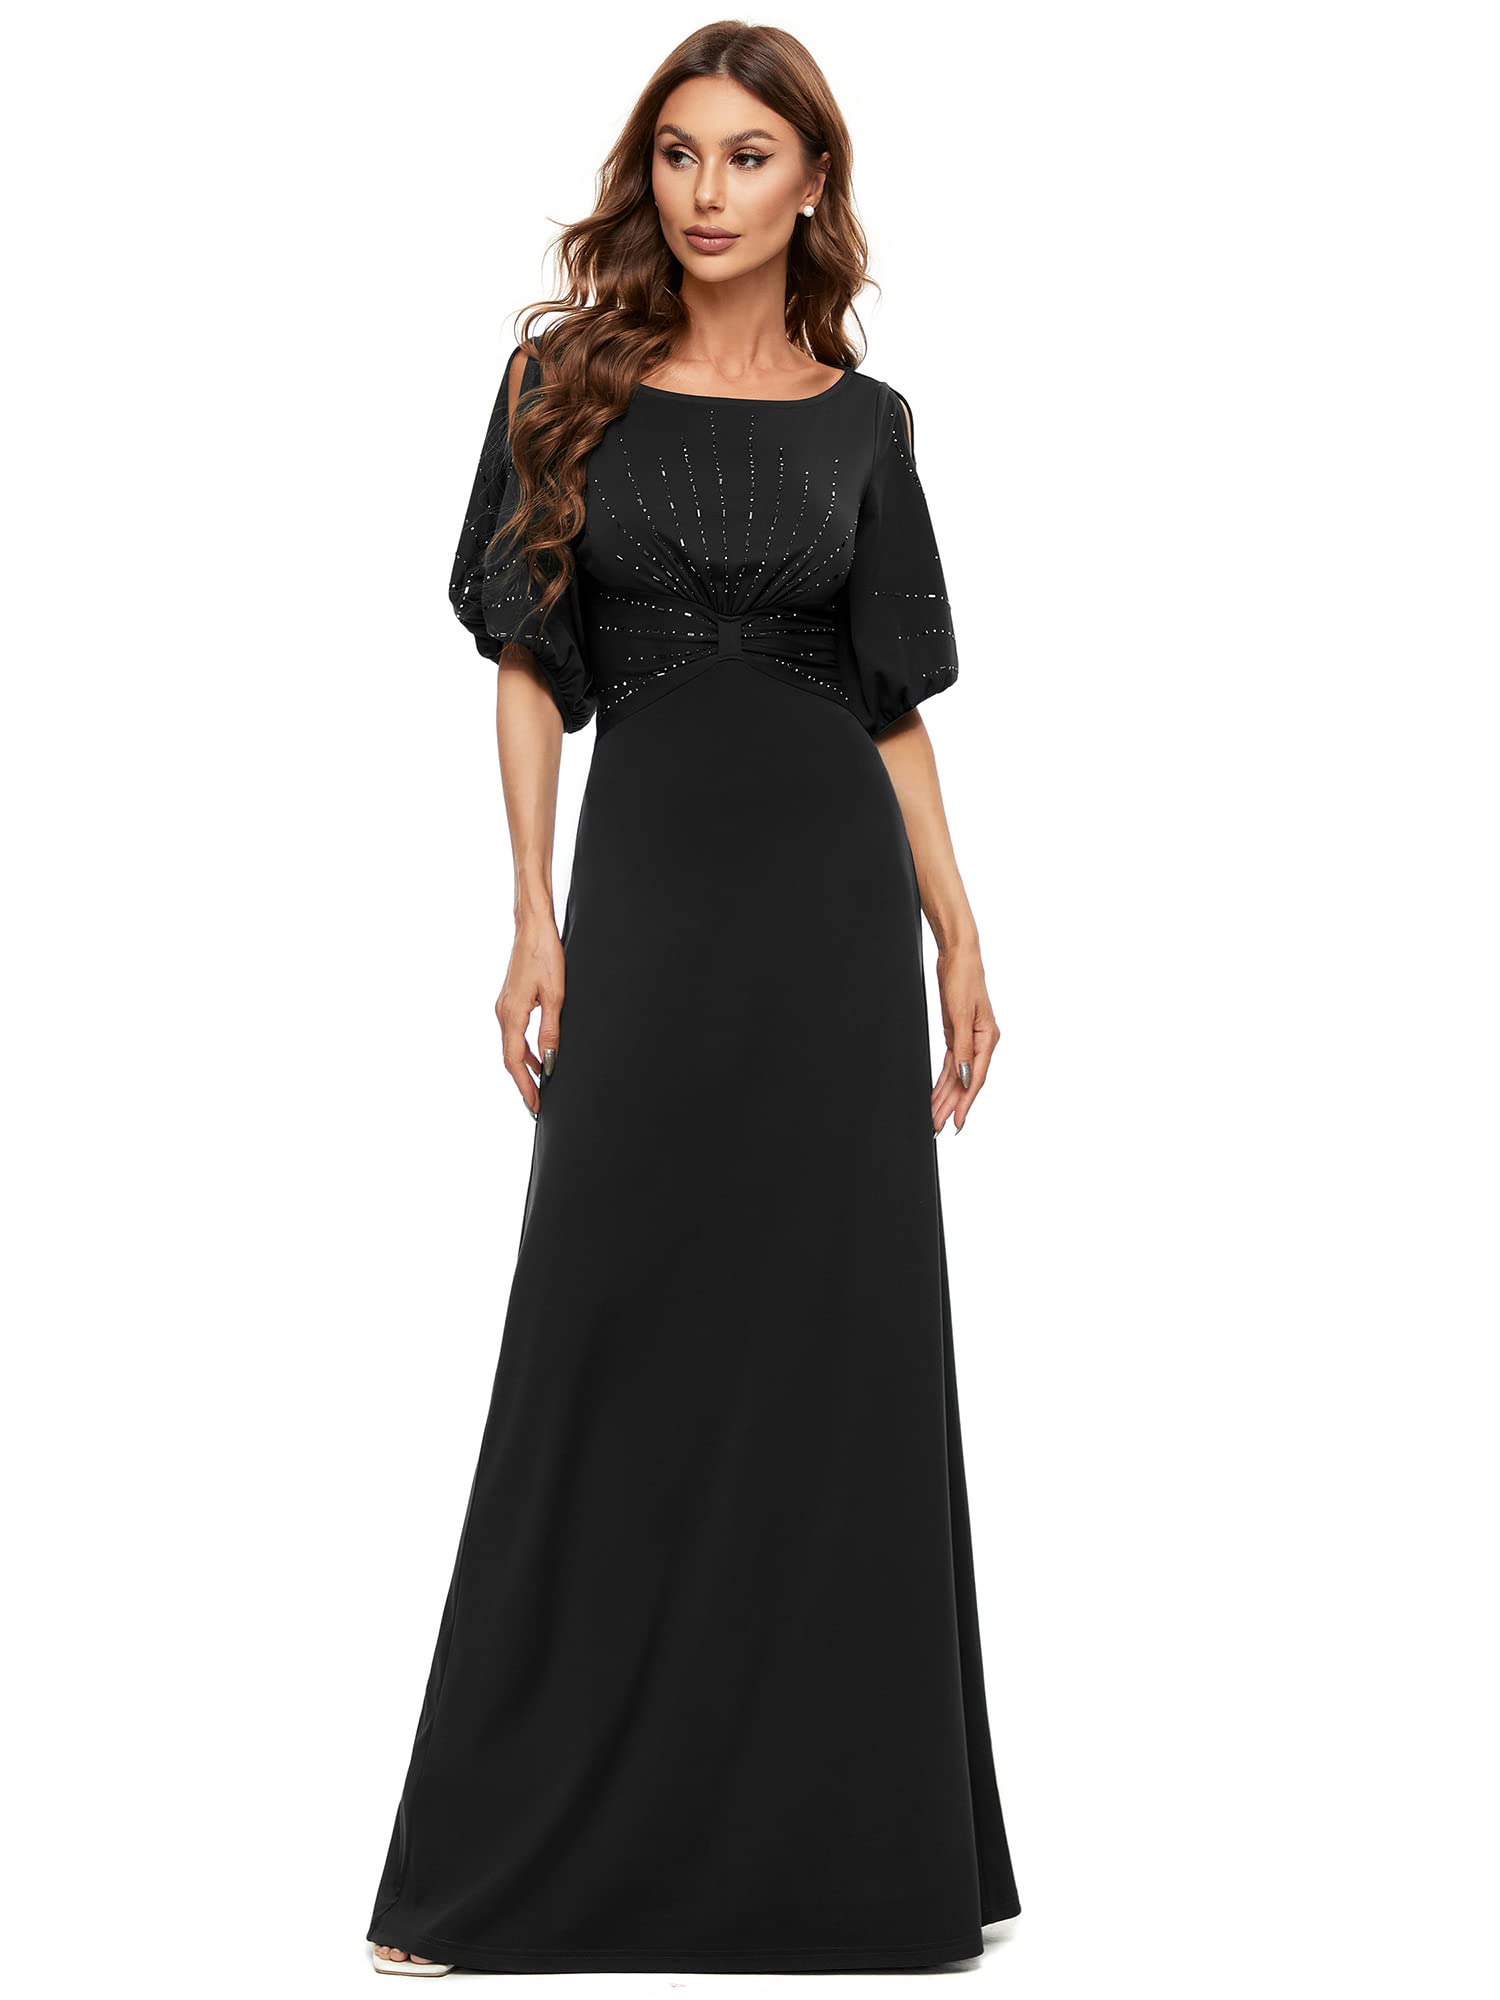 Ever-Pretty Women's Sequin Hollow Sleeve Black Dress Maxi Prom Gown Black US10